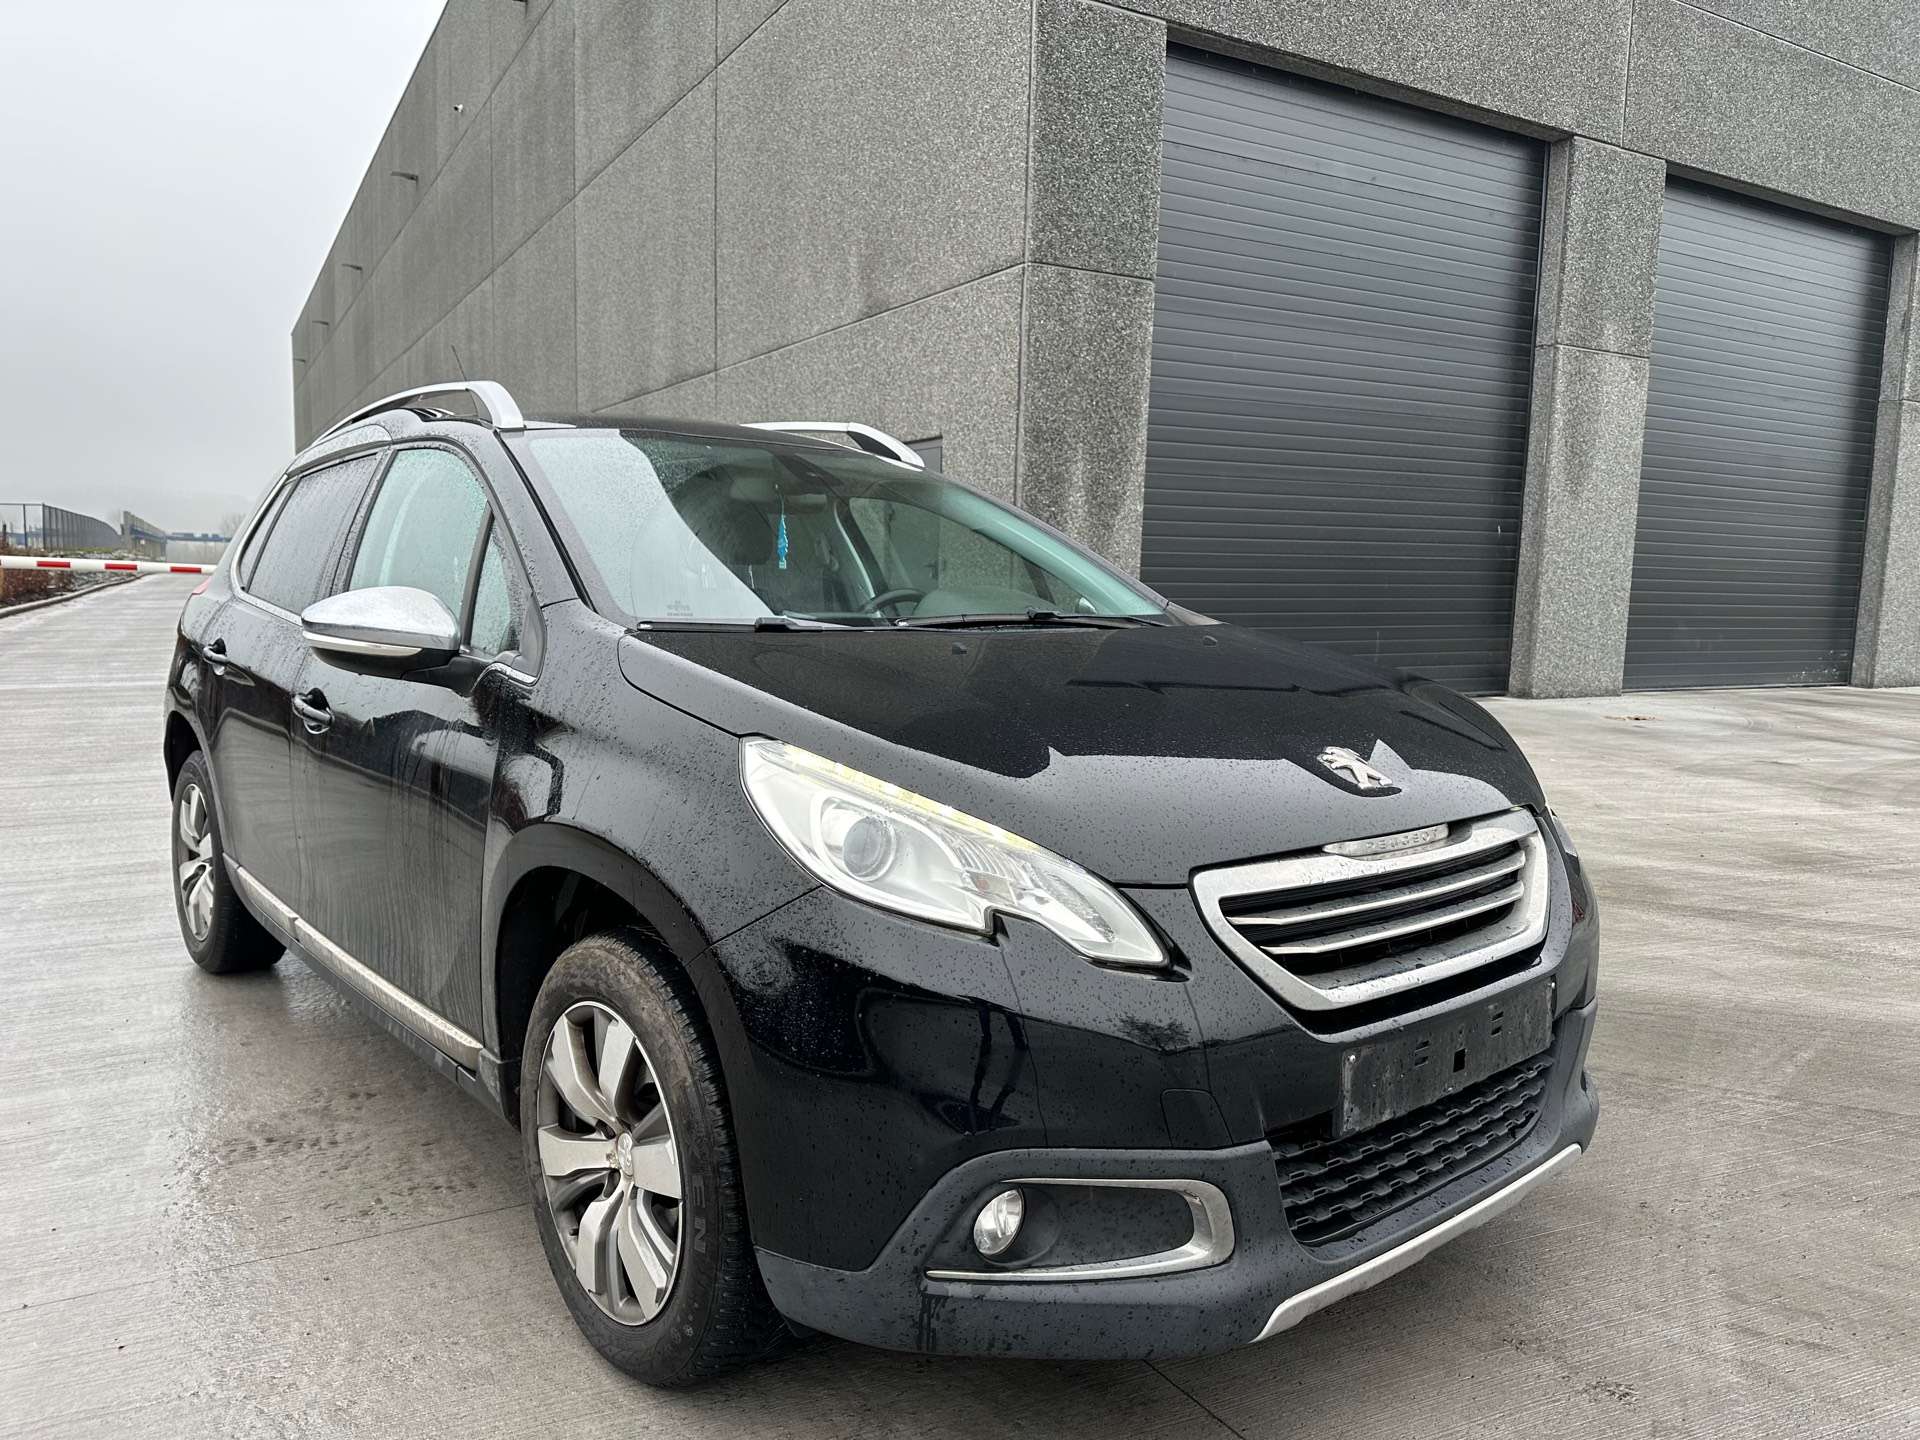 Peugeot 2008 Off-Road/Pick-up in Black used in Bruxelles for € 7,950.-